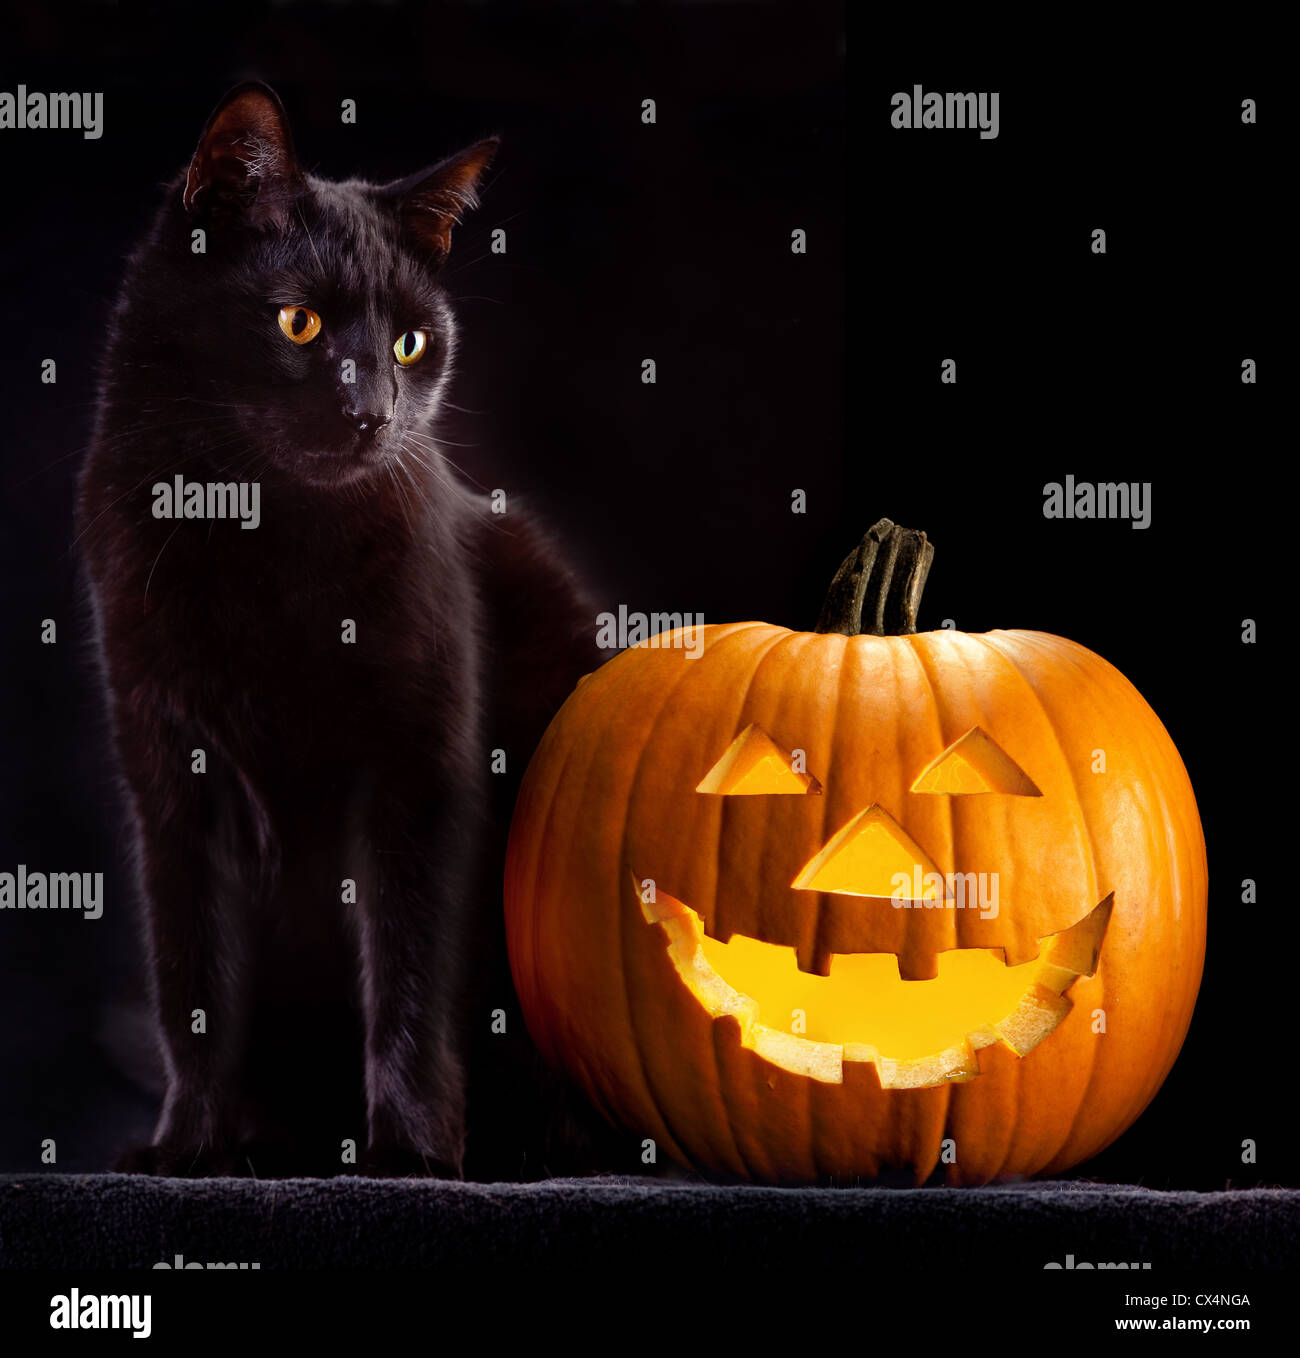 Halloween pumpkin and black cat scary spooky and creepy horror holliday superstition evil animal and jack lantern Stock Photo